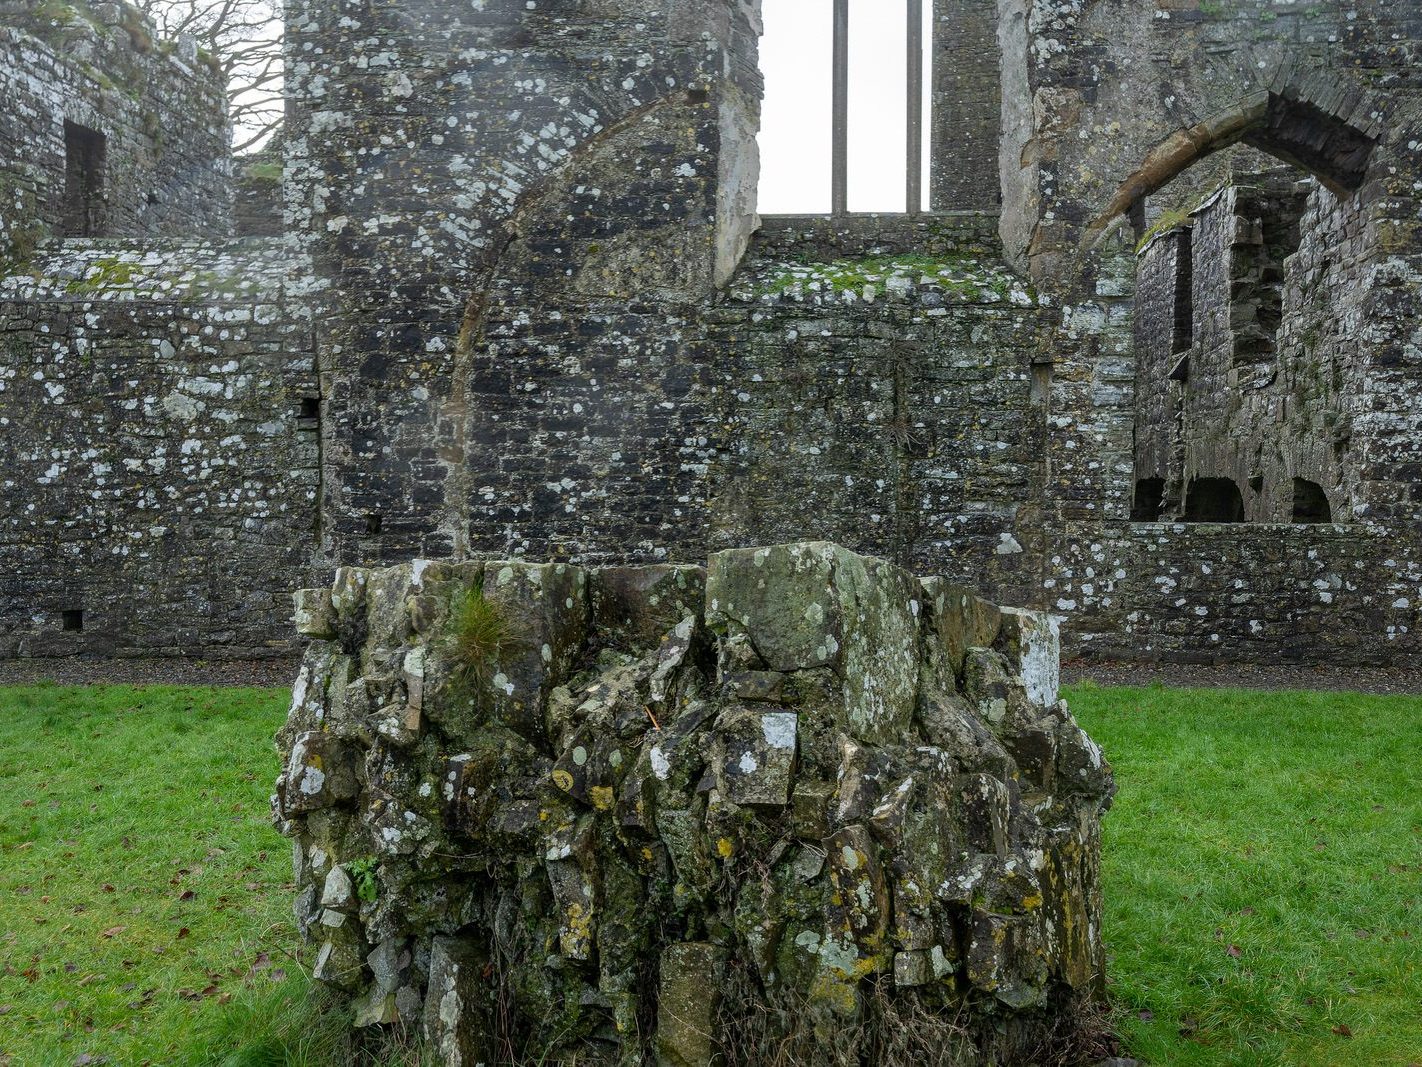 BECTIVE ABBEY WHICH I VISITED LAST CHRISTMAS [THERE WERE NO OTHER VISITORS AS IT WAS A VERY WET DAY]--225239-1